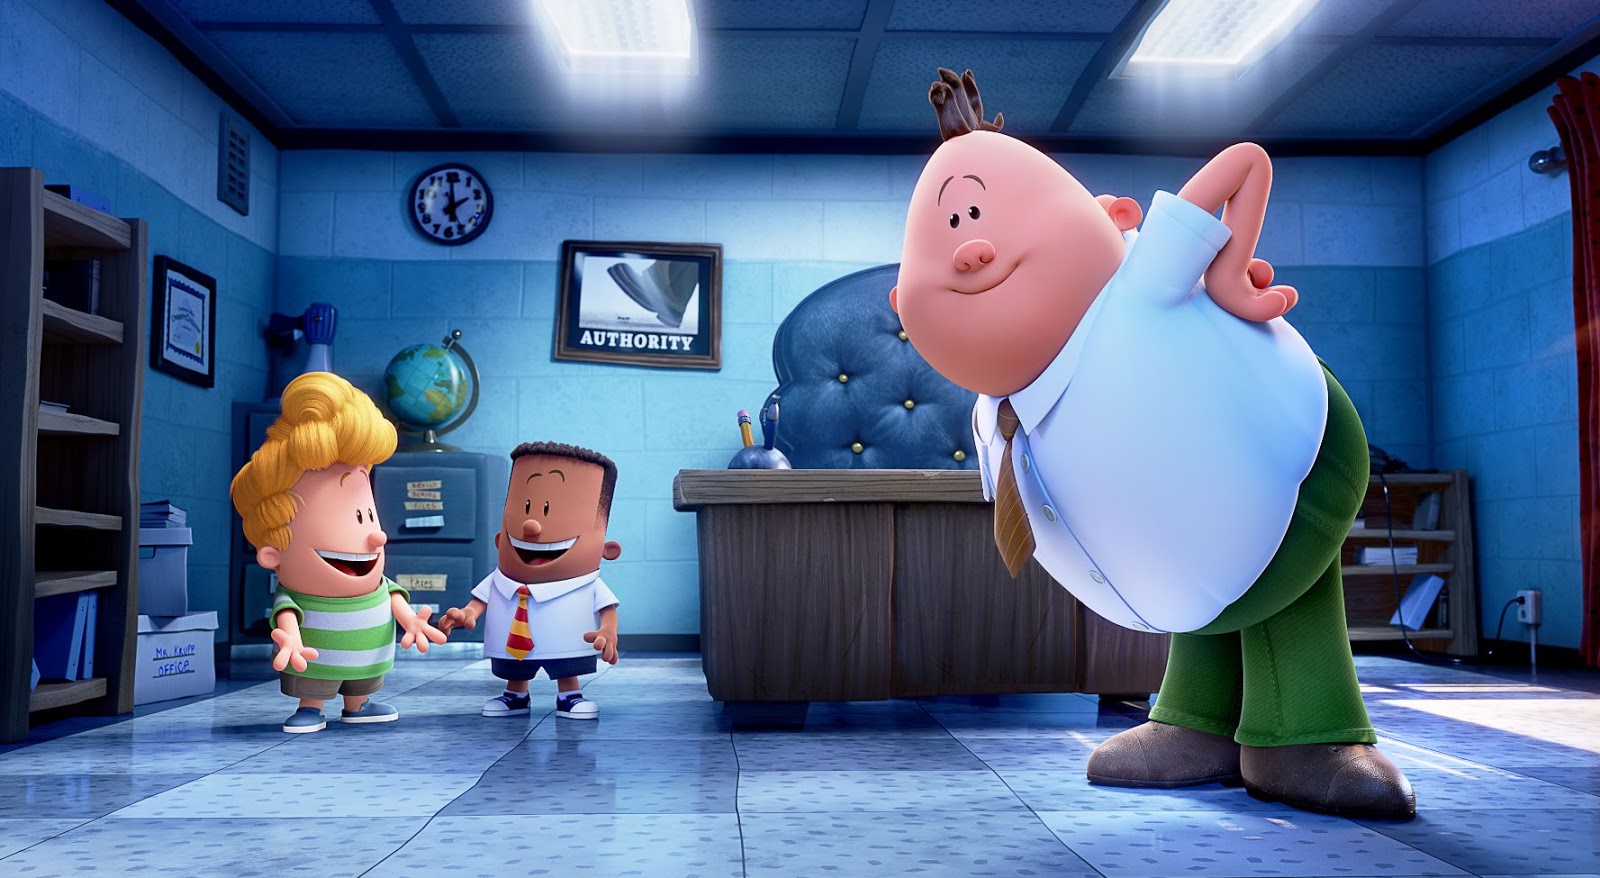 CAPTAIN UNDERPANTS THE FIRST EPIC MOVIE Trailers, Clips